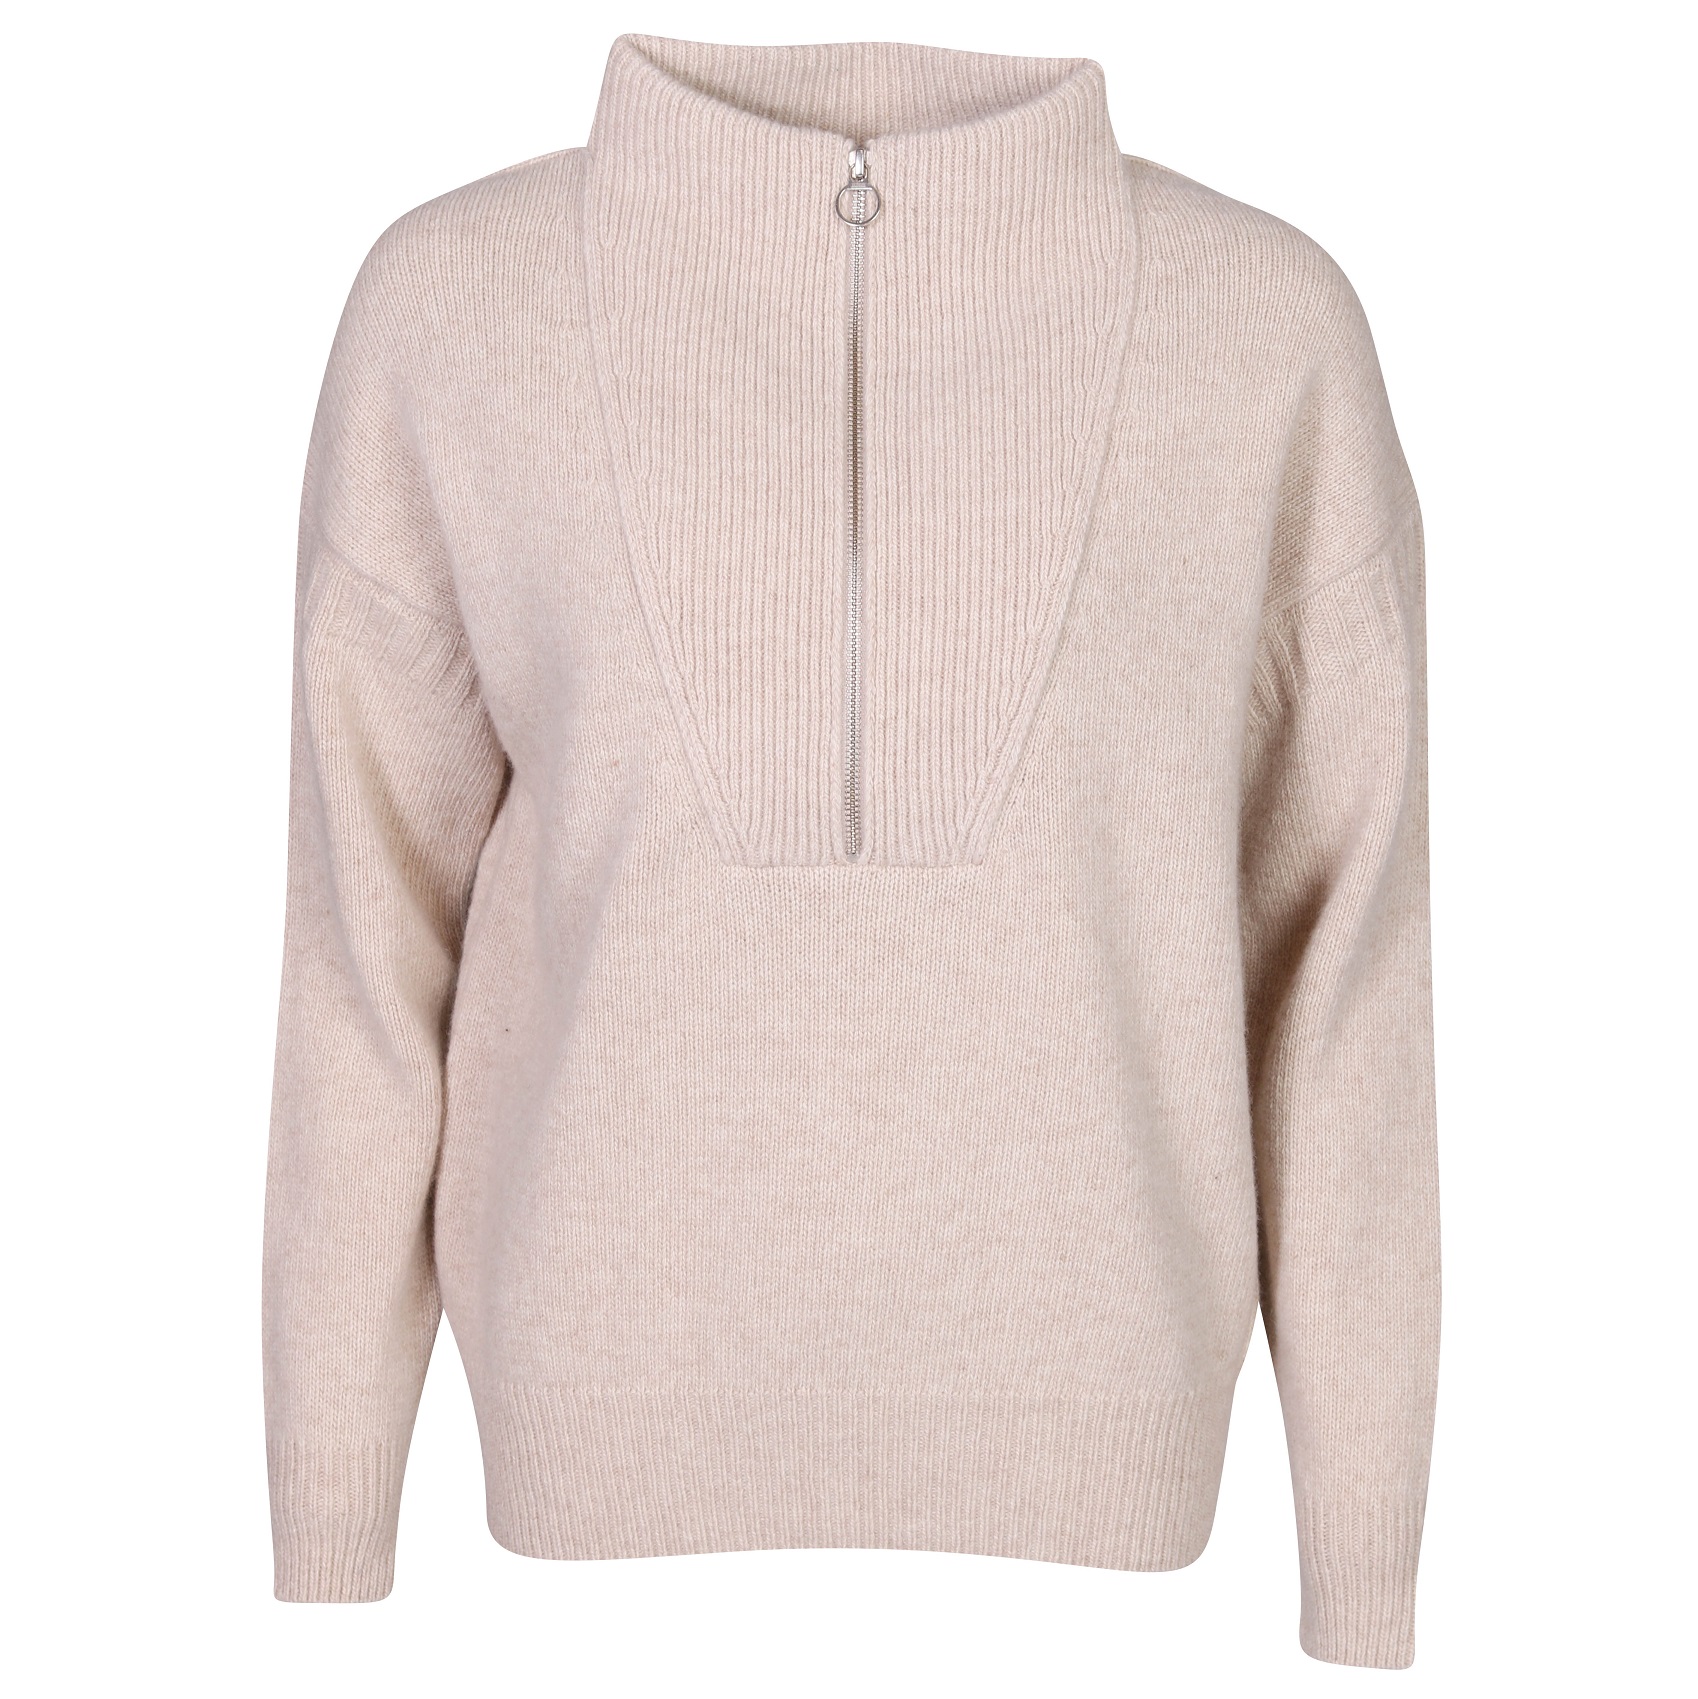 CLOSED Troyer Knit Pullover in Sand